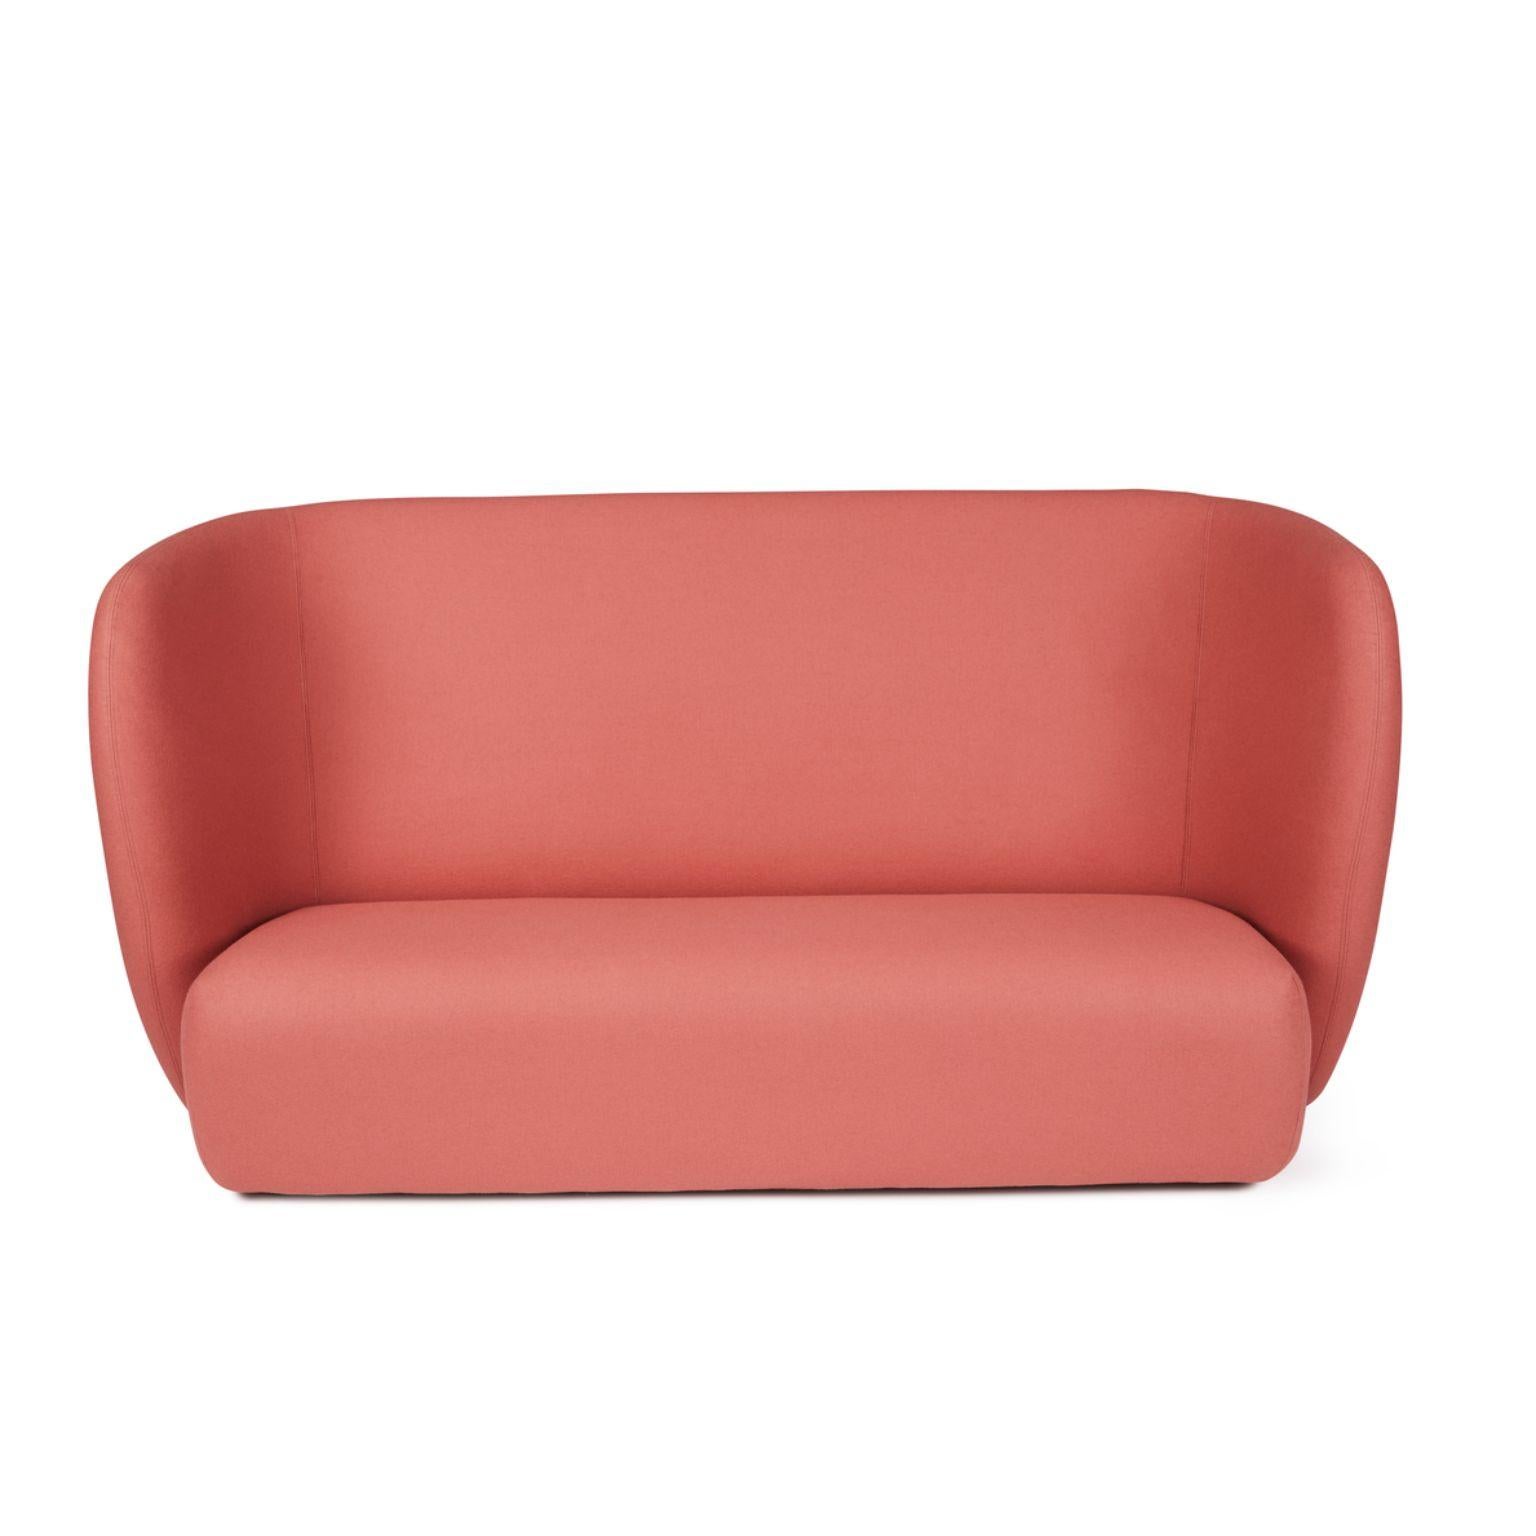 Haven 3 seater coral by Warm Nordic
Dimensions: D 220 x W 84 x H 110/40 cm
Material: Textile upholstery, Foam, spring system, wood
Weight: 84 kg
Also available in different colours and finishes.

Haven is a contemporary sofa with a simple,